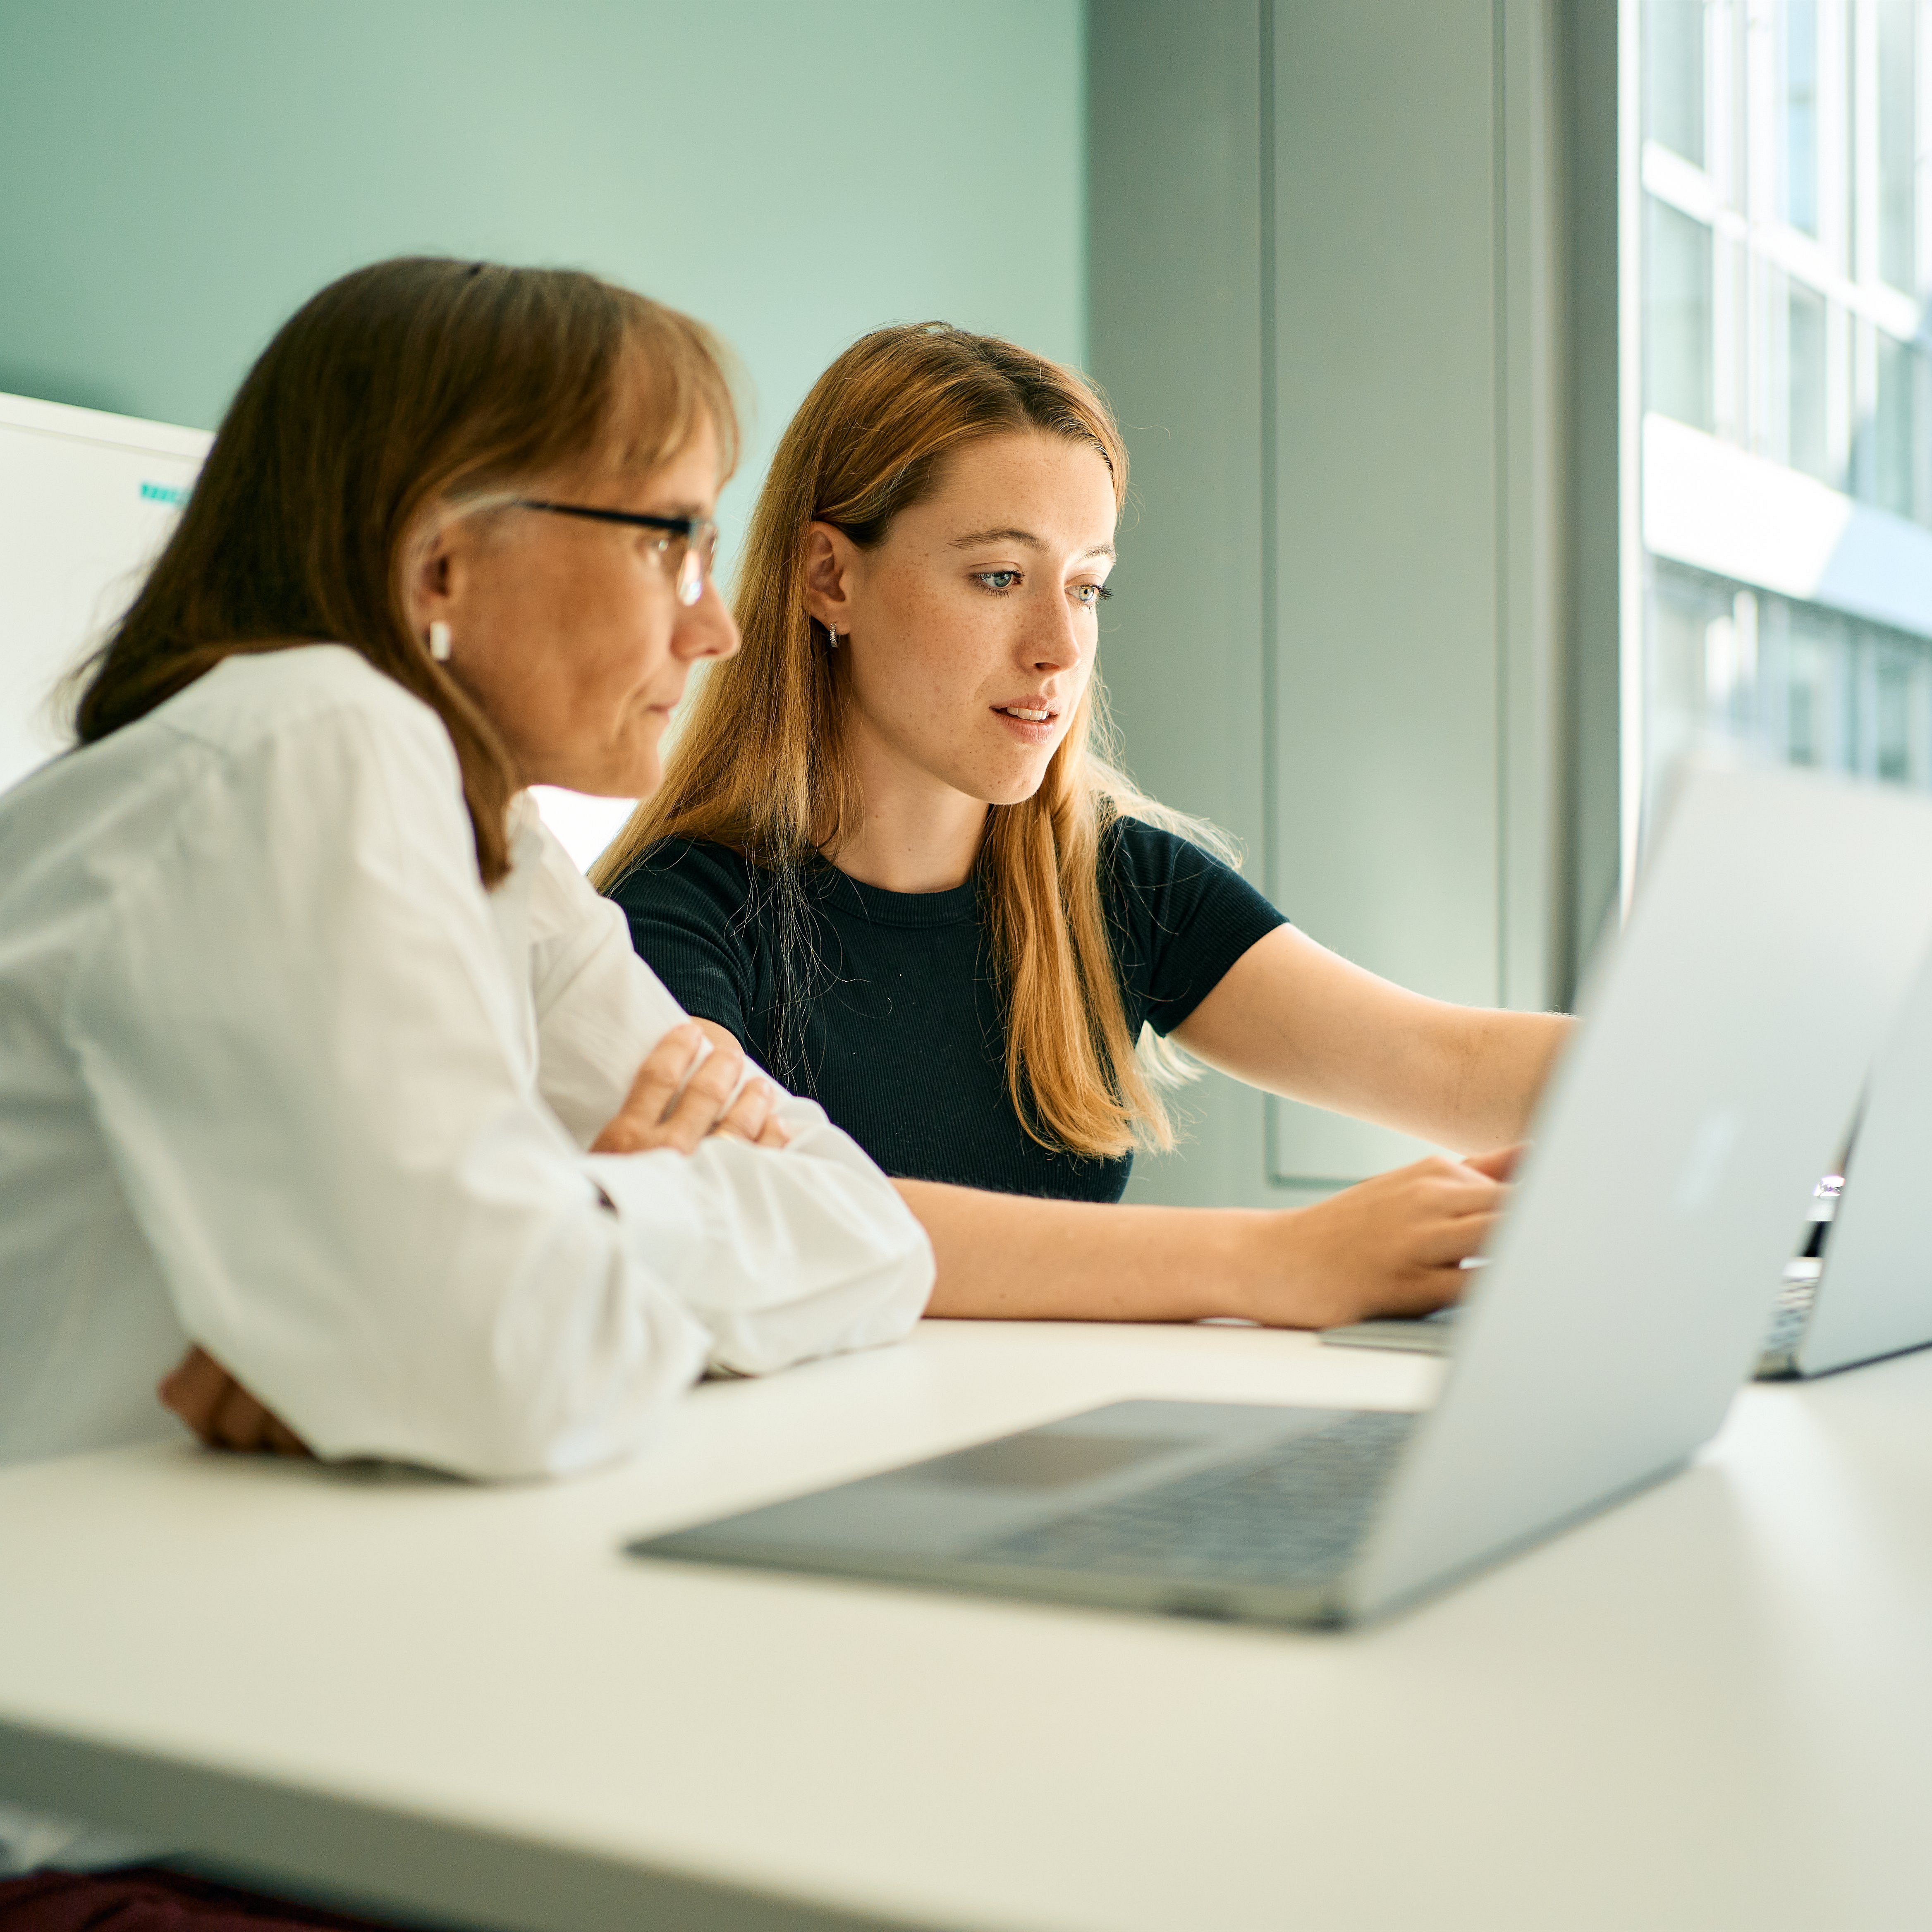 Two female employees discuss together in front of their laptops.